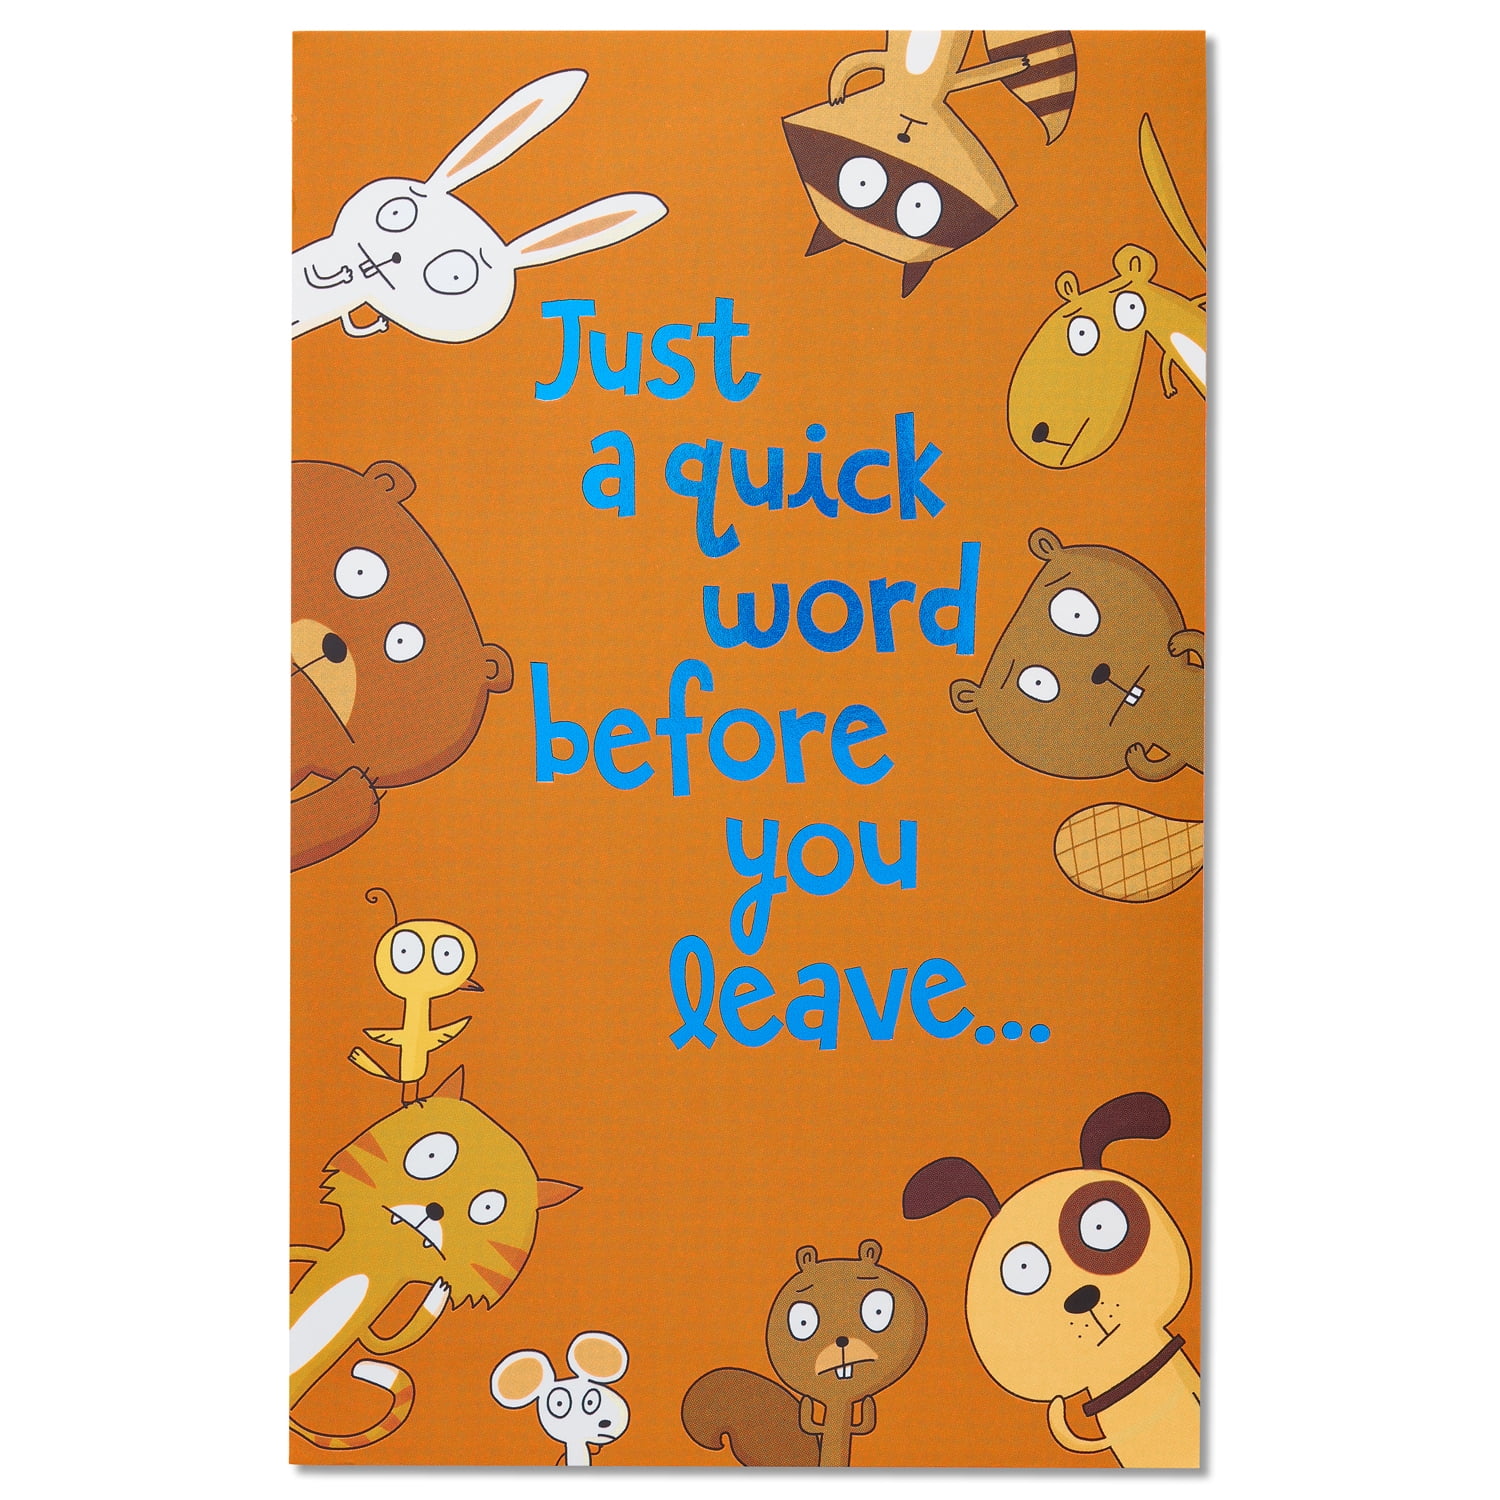 Details about  / Encouragement Smile Animal Thanks American Greetings Dog Card Funny Humorous